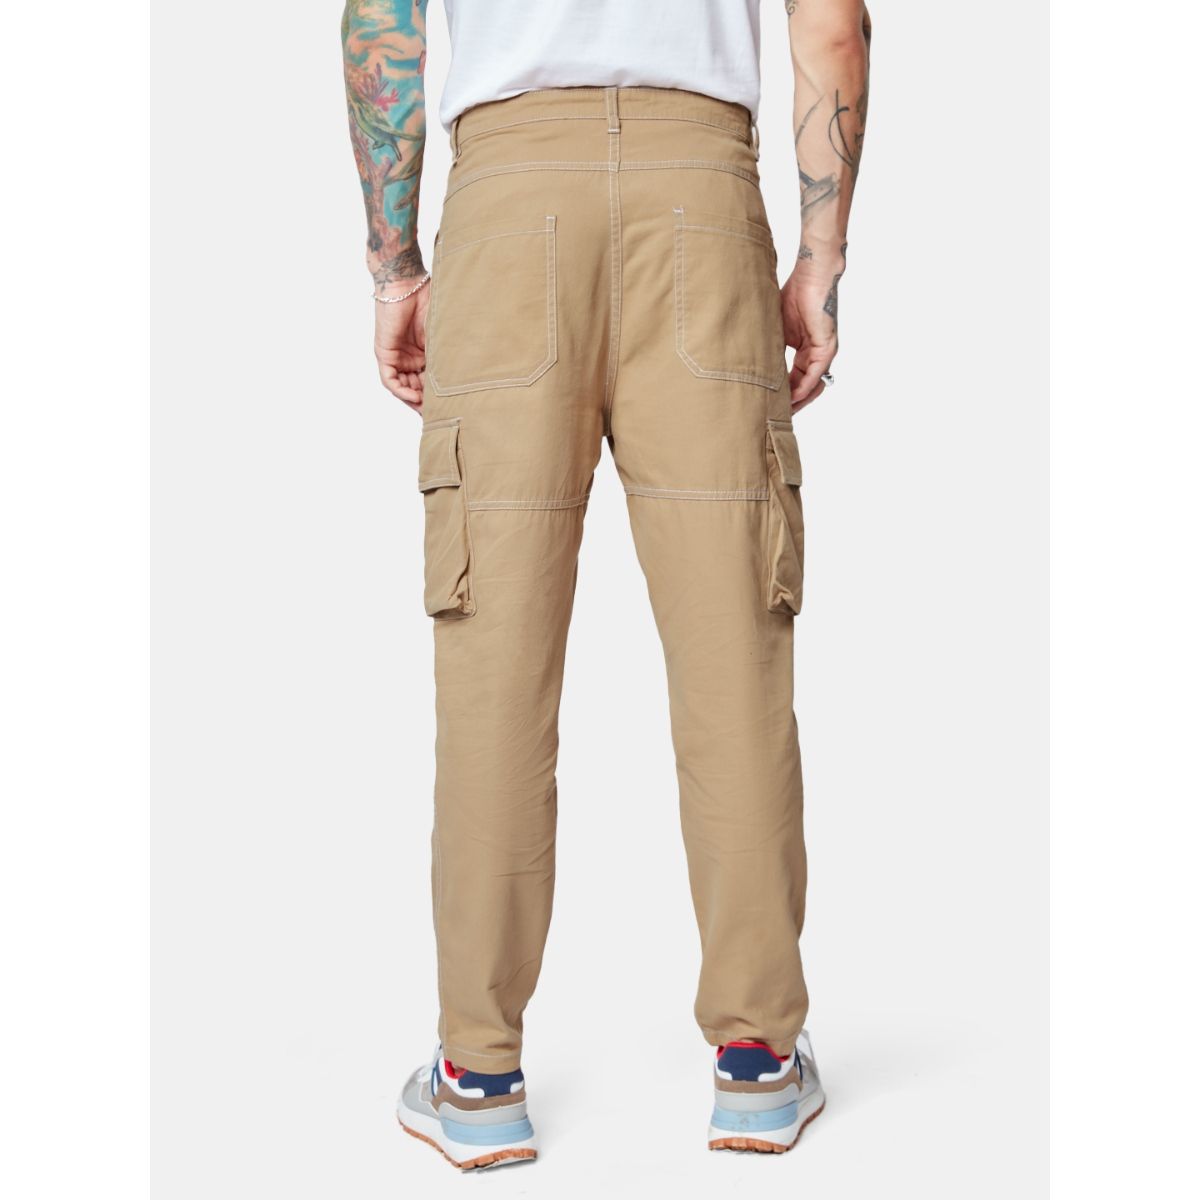 Off Duty India Trousers and Pants  Buy Off Duty India Utility Relaxed Fit Cargo  Pantsnude Online  Nykaa Fashion